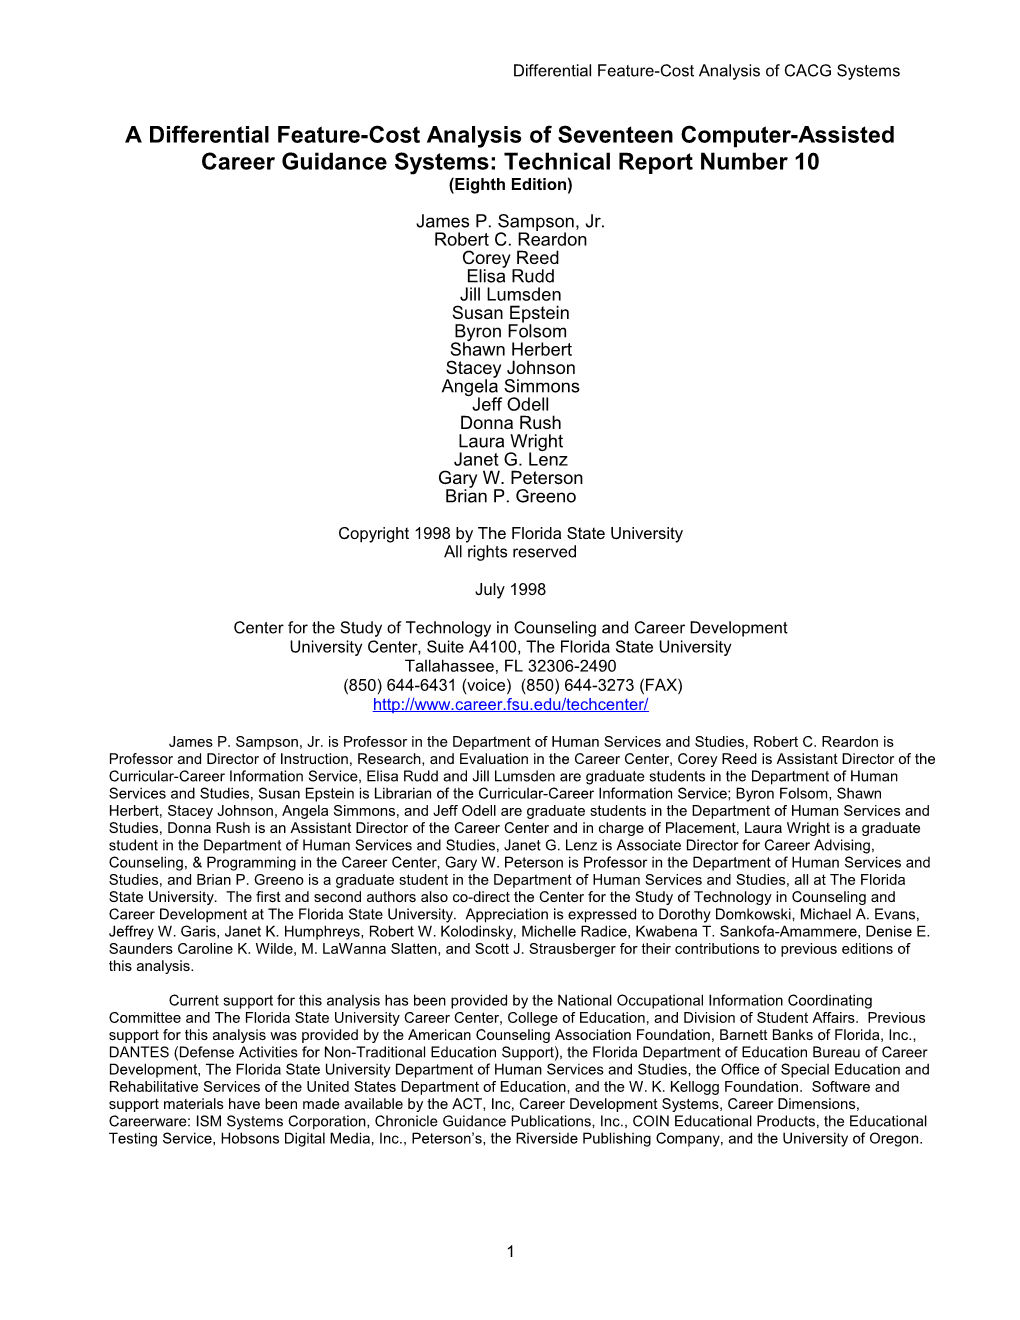 A Differential Feature-Cost Analysis of Eighteen Computer-Assisted Career Guidance Systems